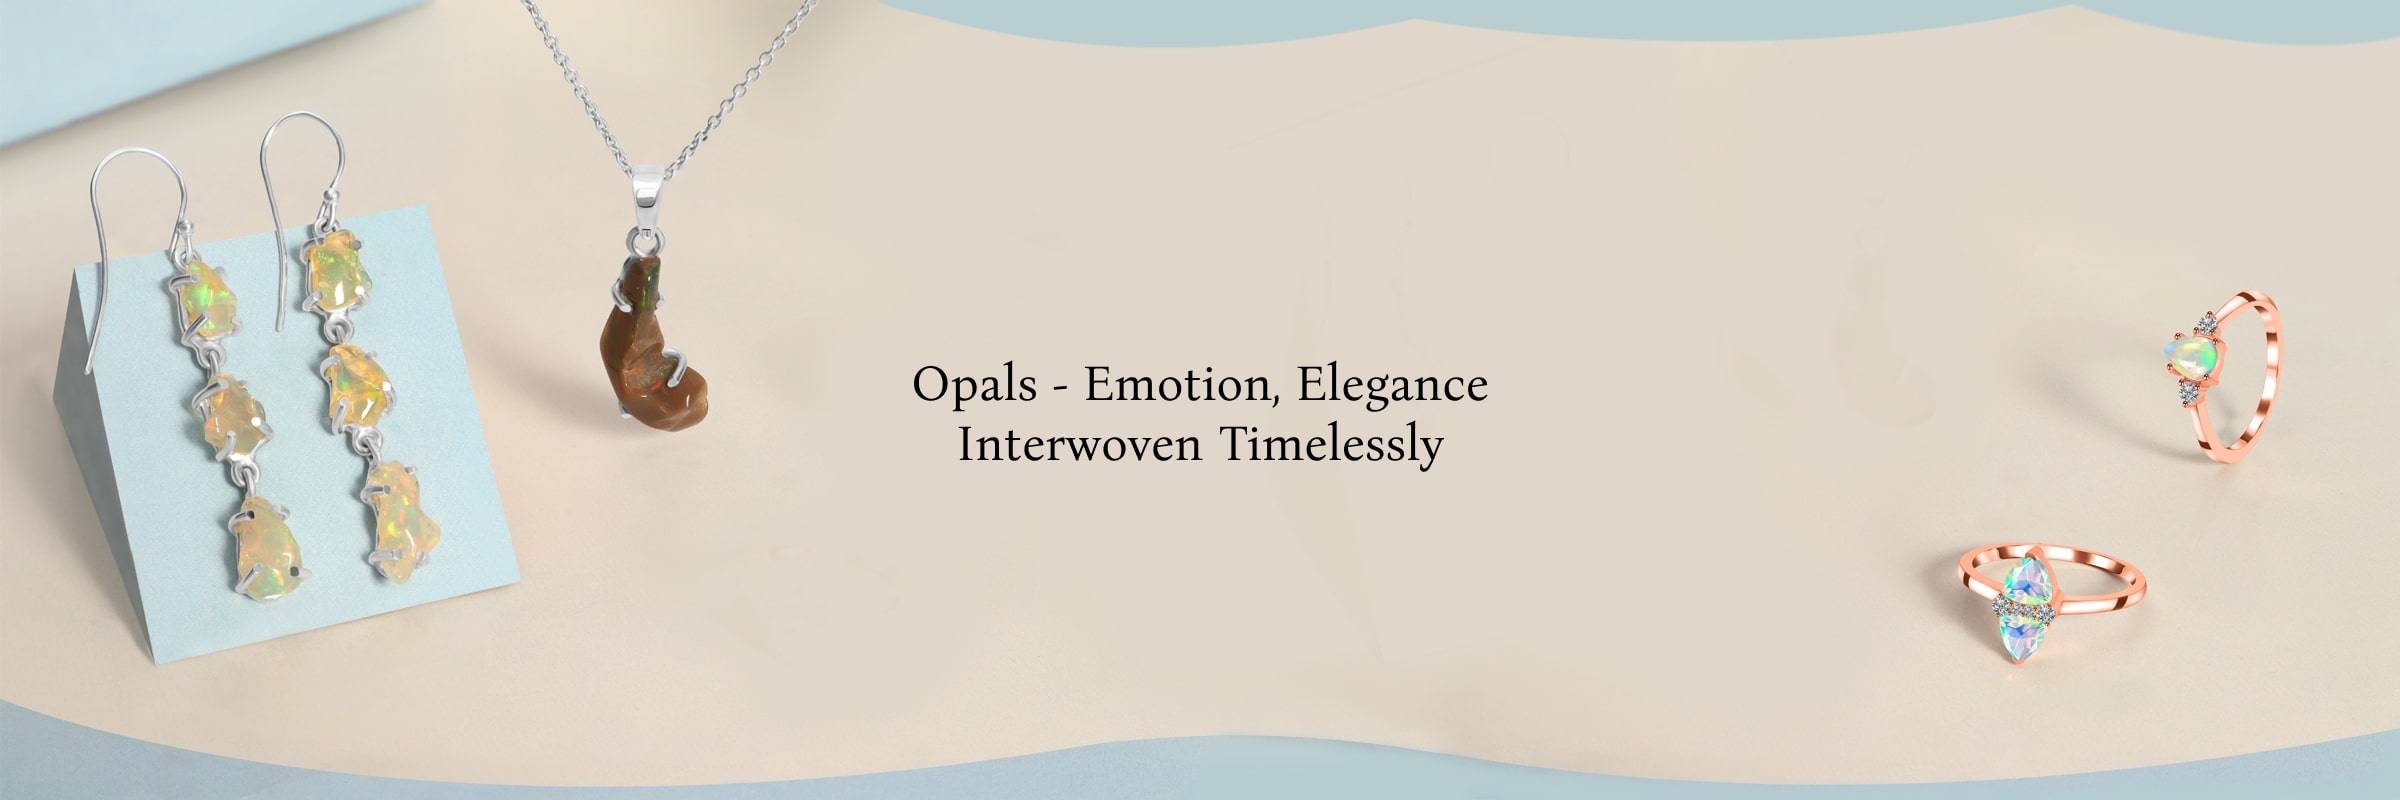 Opals: A Timeless Tapestry of Emotion and Elegance